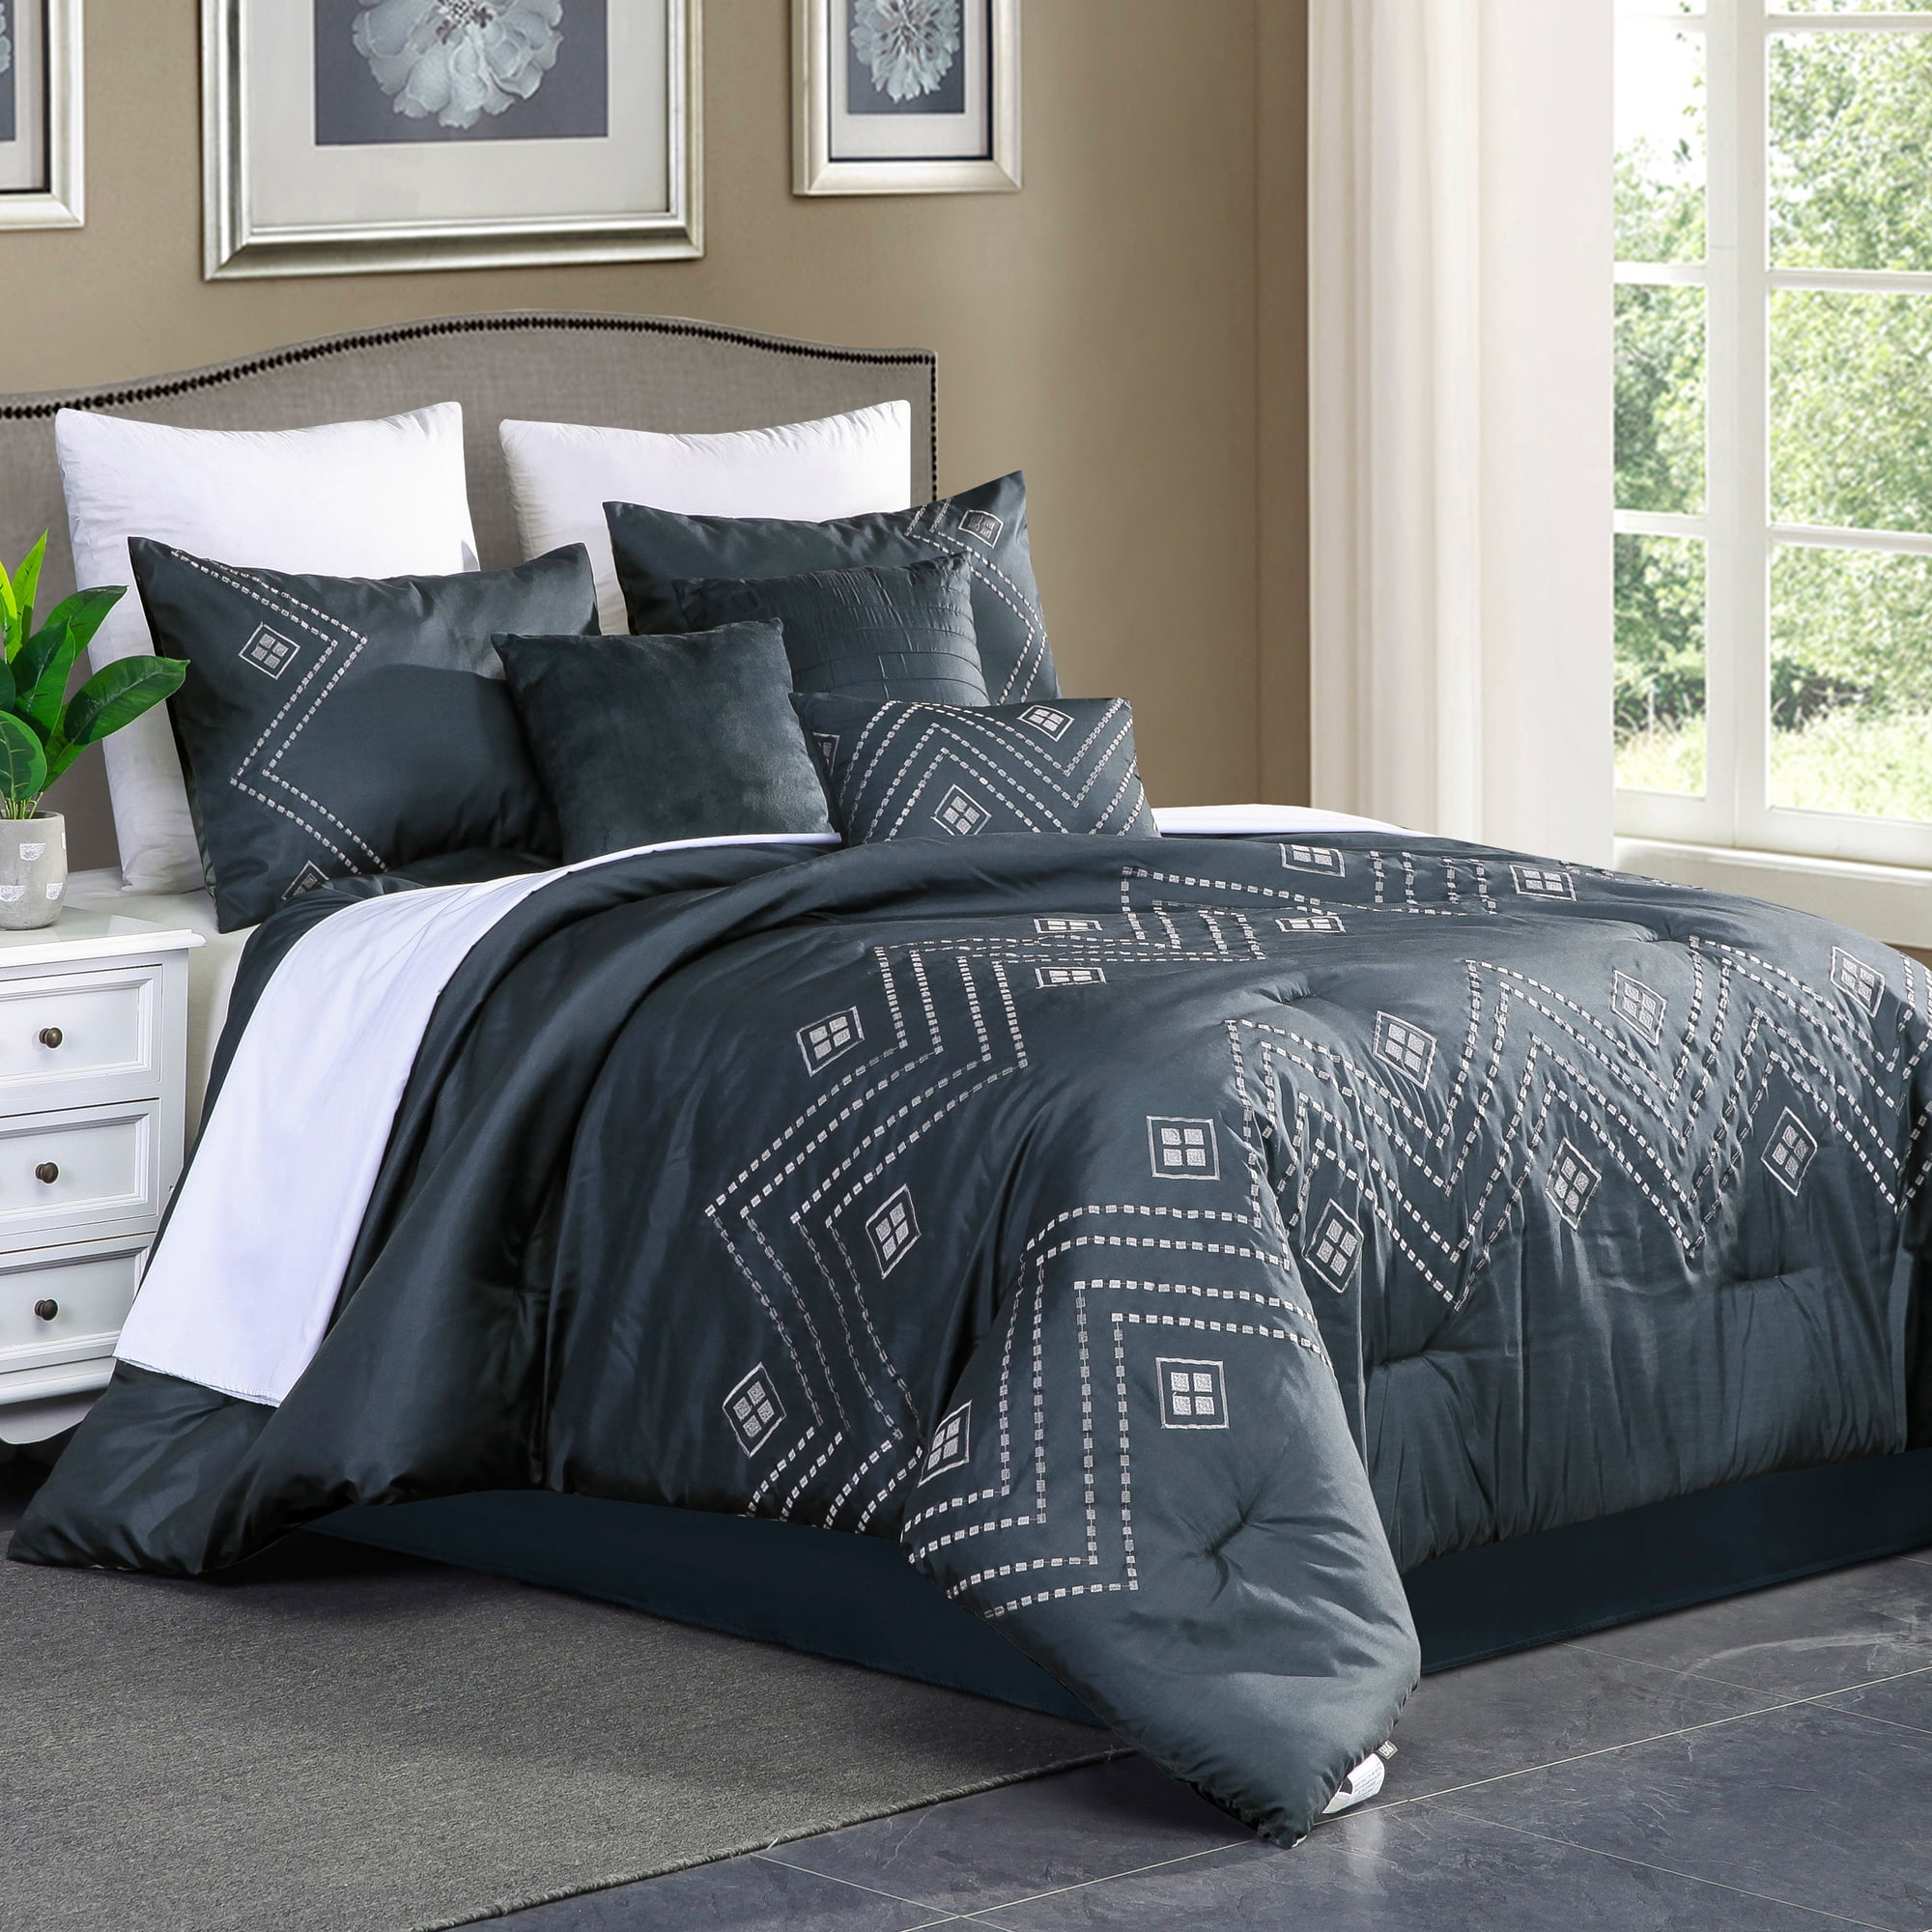 7 Piece Oversized Luxury Embroidery Bed in Bag Comforter Black Tan King 